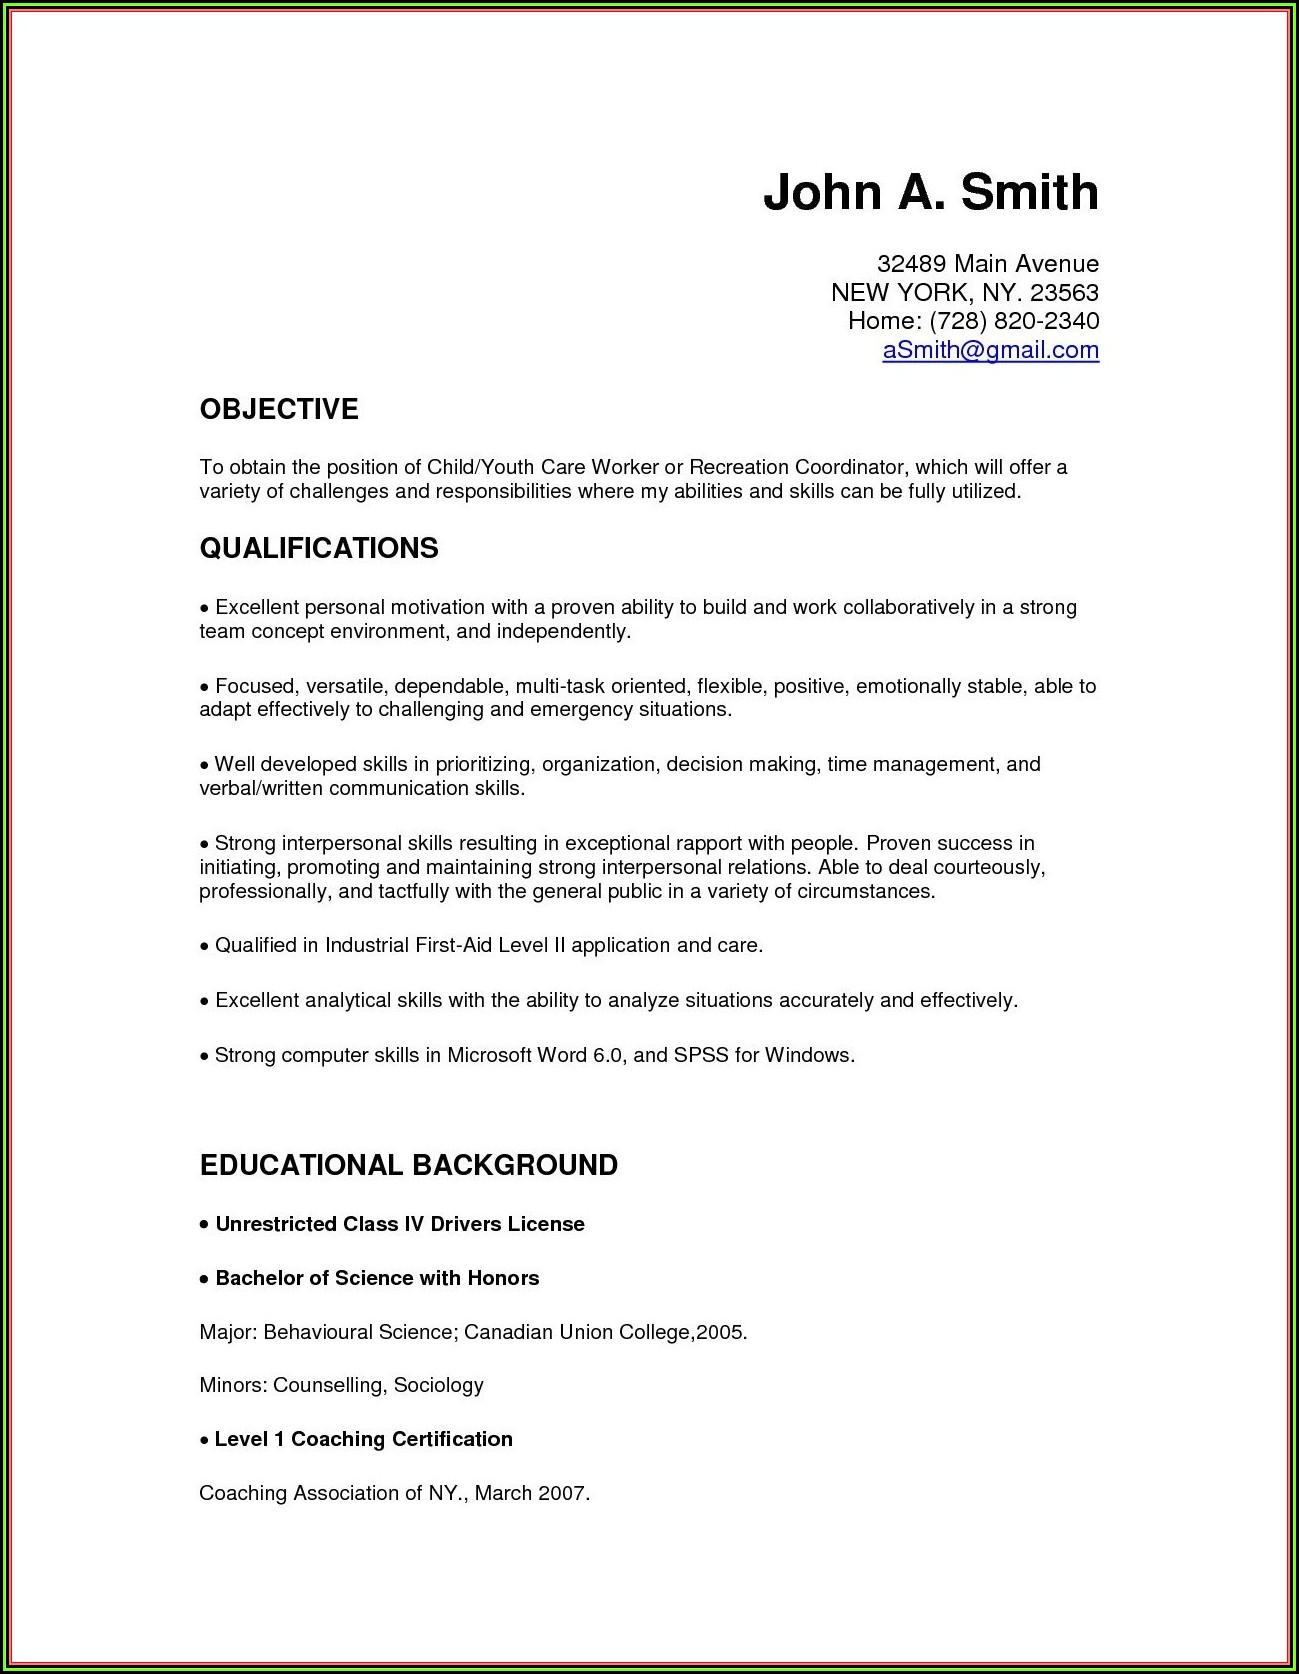 How To Prepare My First Resume